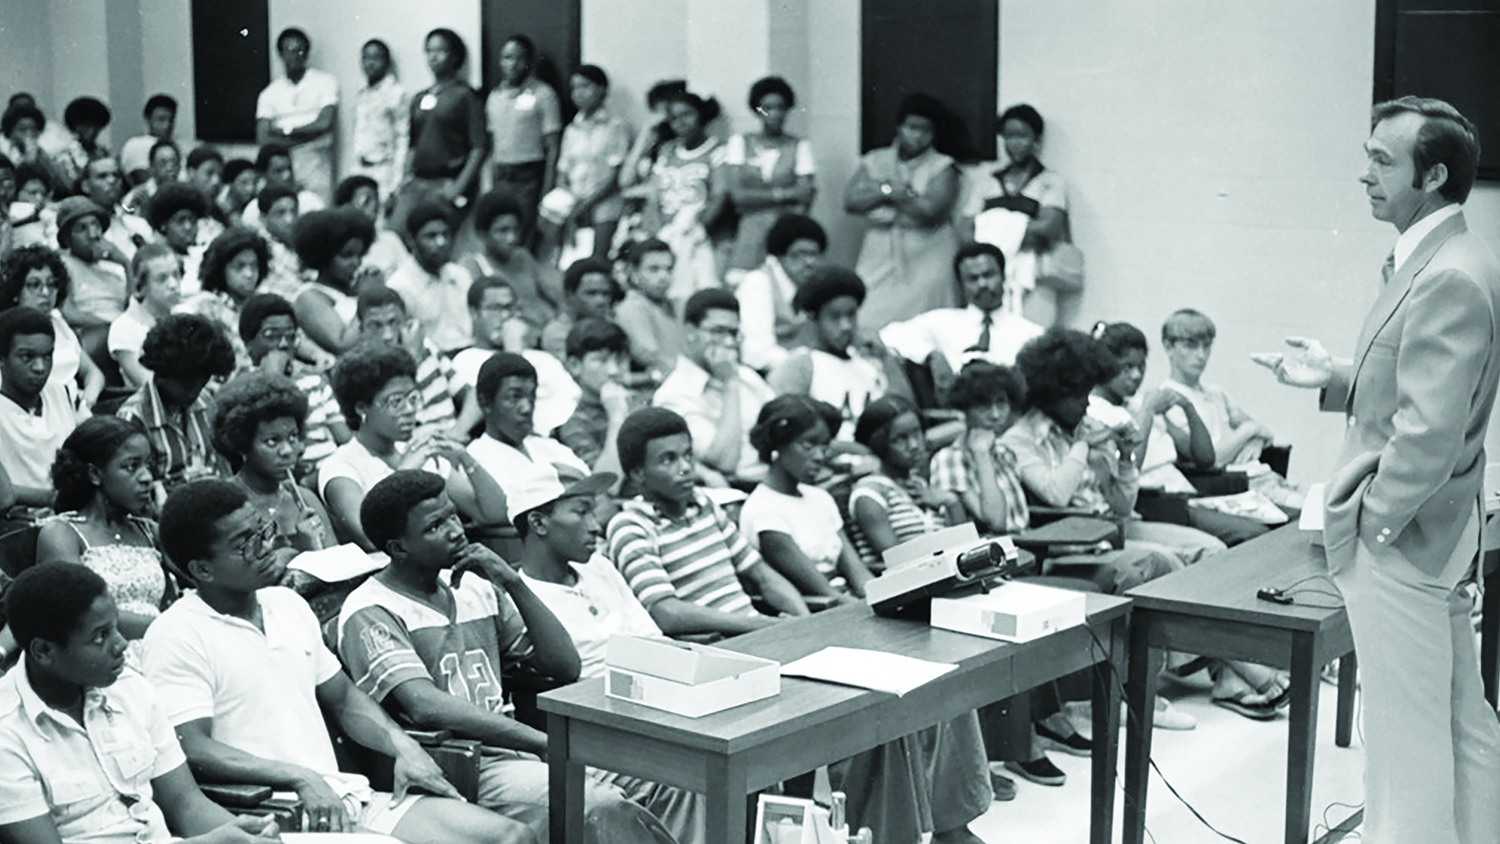 Black and white photo of MEP students attending a class. Professor stands at front while speaking.